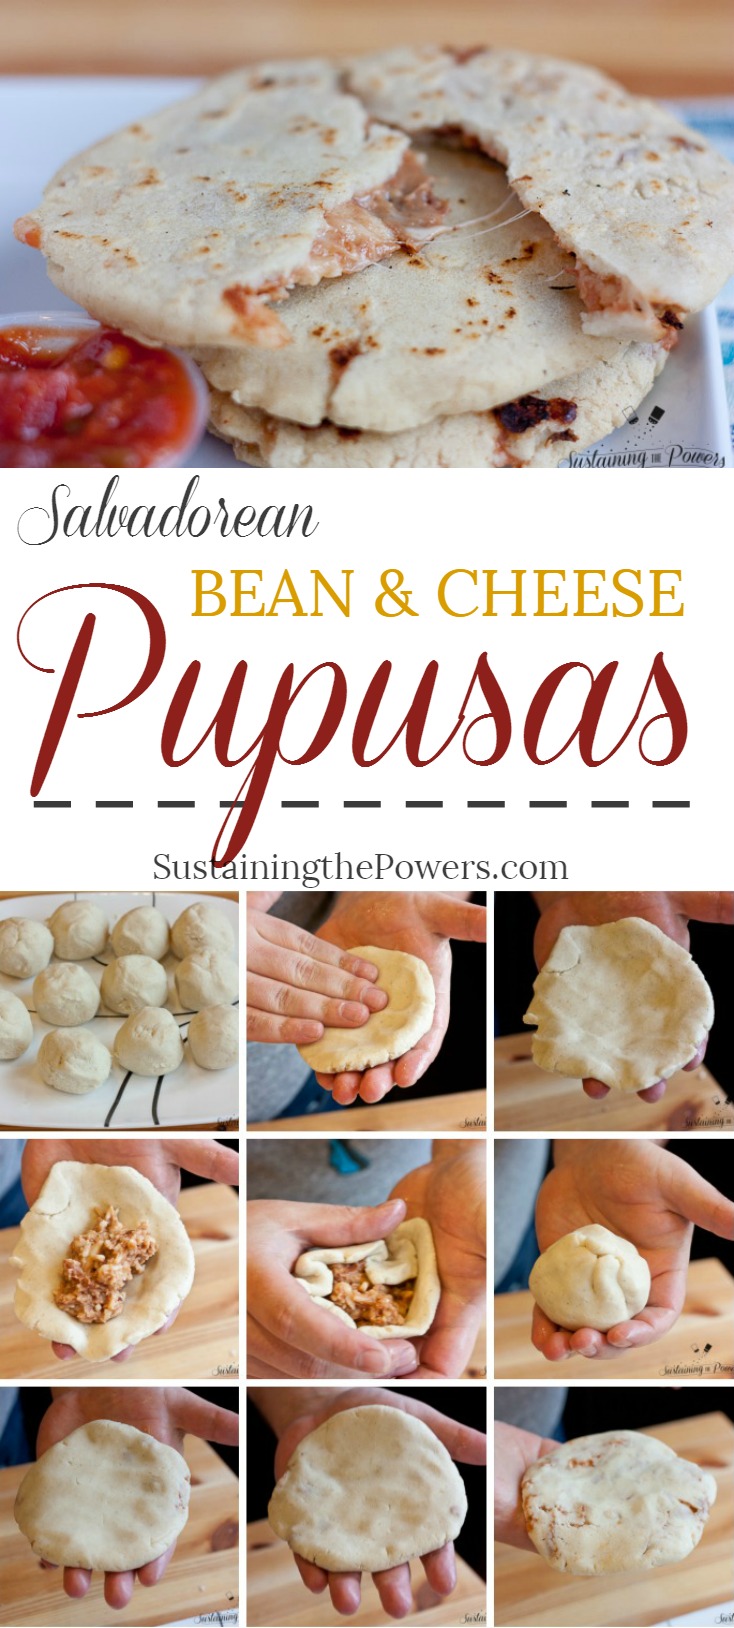 How to Make Salvadorean Bean and Cheese Pupusas | Pupusas are pillowy corn tortillas stuffed with beans and cheese. They're super cheap, fun and quick to make and naturally gluten-free. Click through to learn how to make them with a recipe + quick video tutorial! 